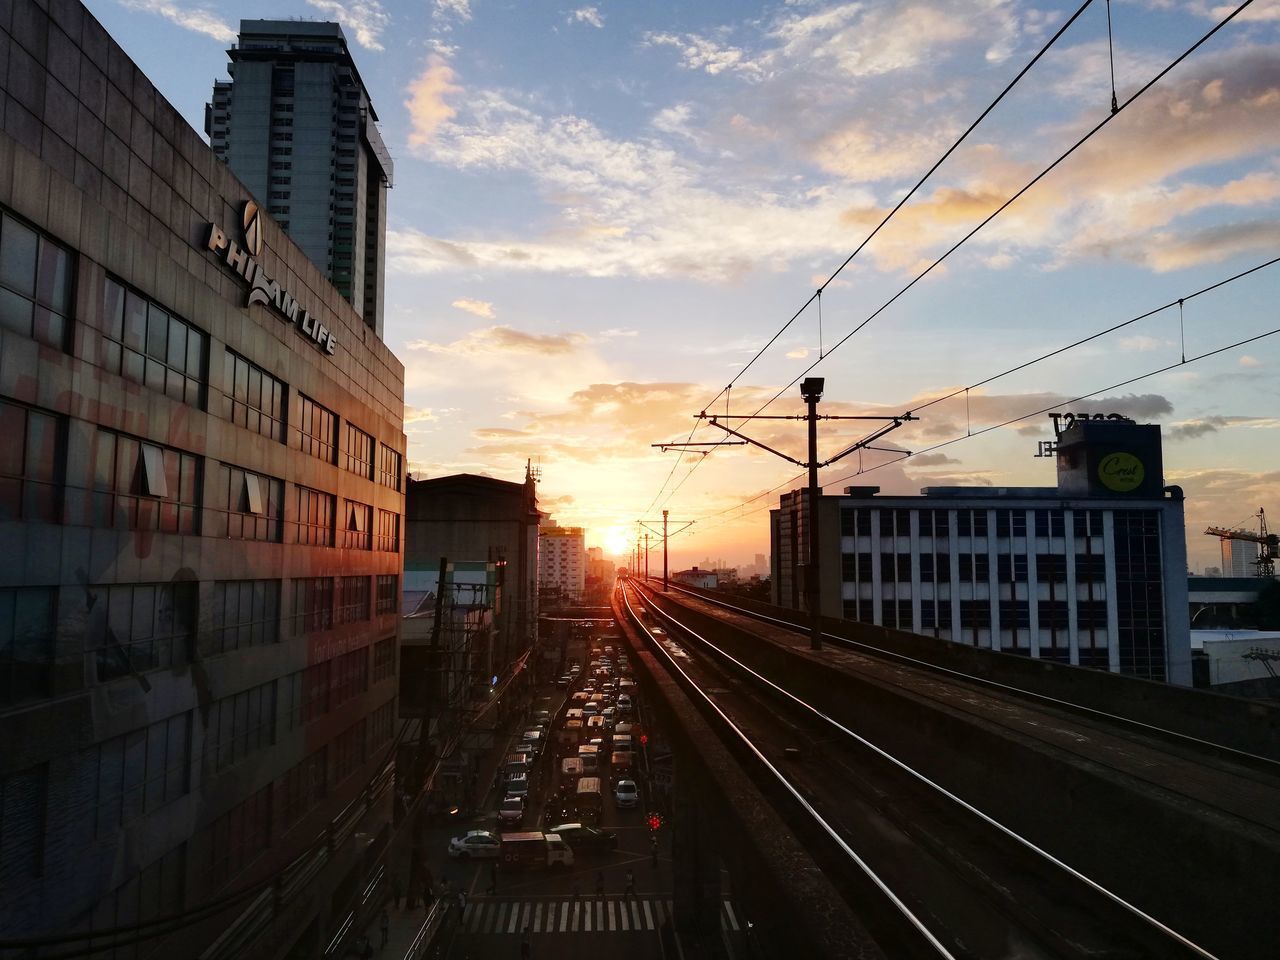 RAILROAD TRACKS AMIDST BUILDINGS AGAINST SKY DURING SUNSET